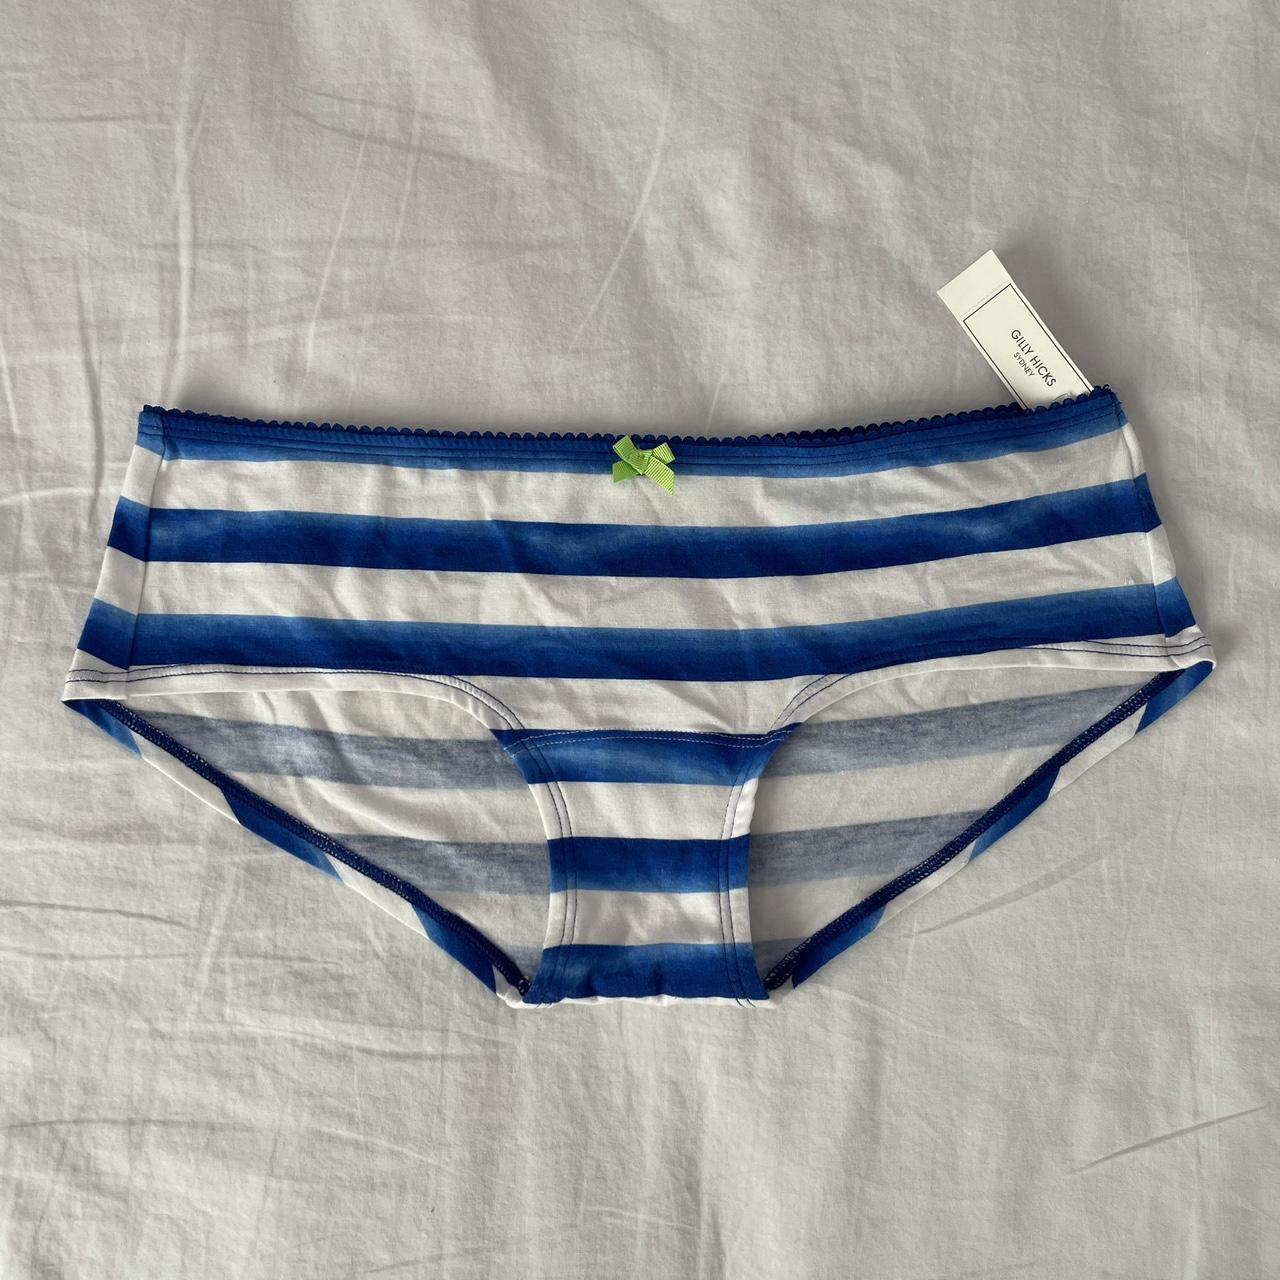 gilly hicks down undies blue and white striped - Depop